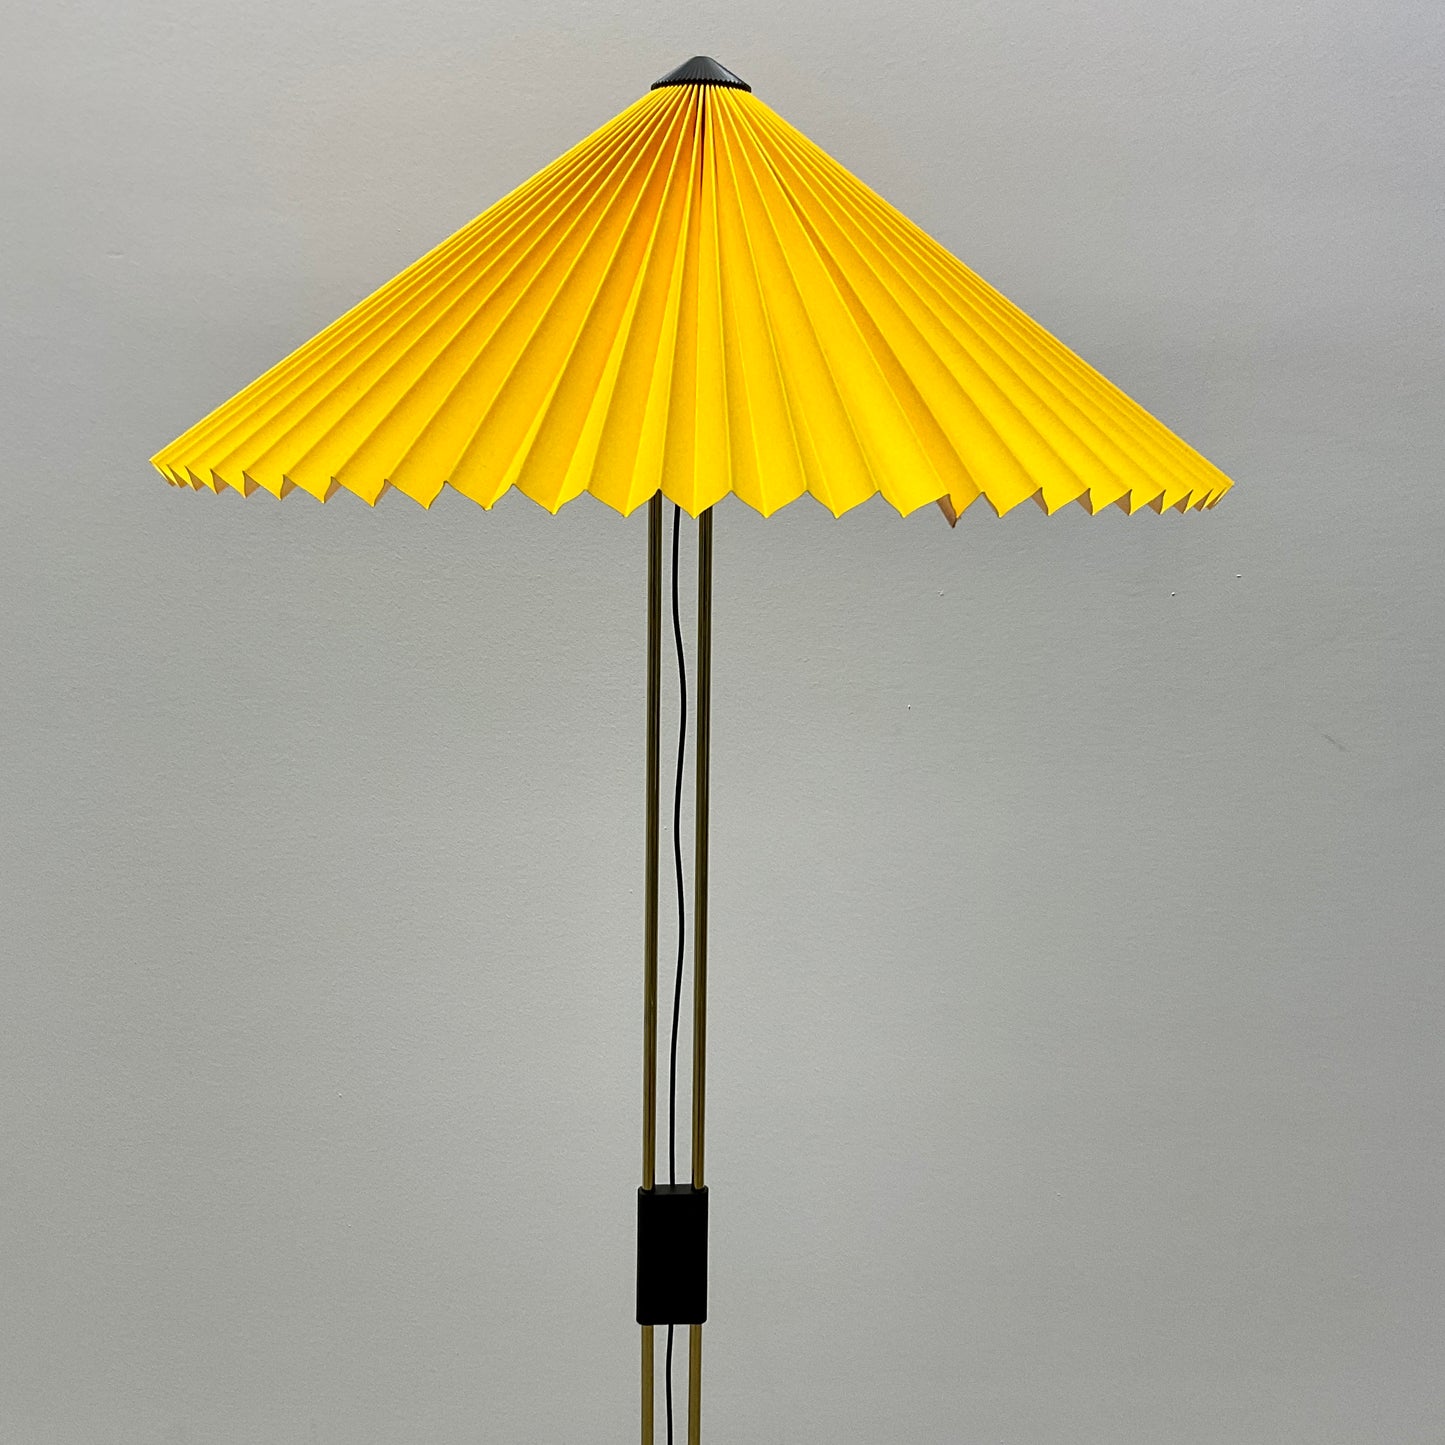 Matin Floor Lamp by Inga Sempé for Hay